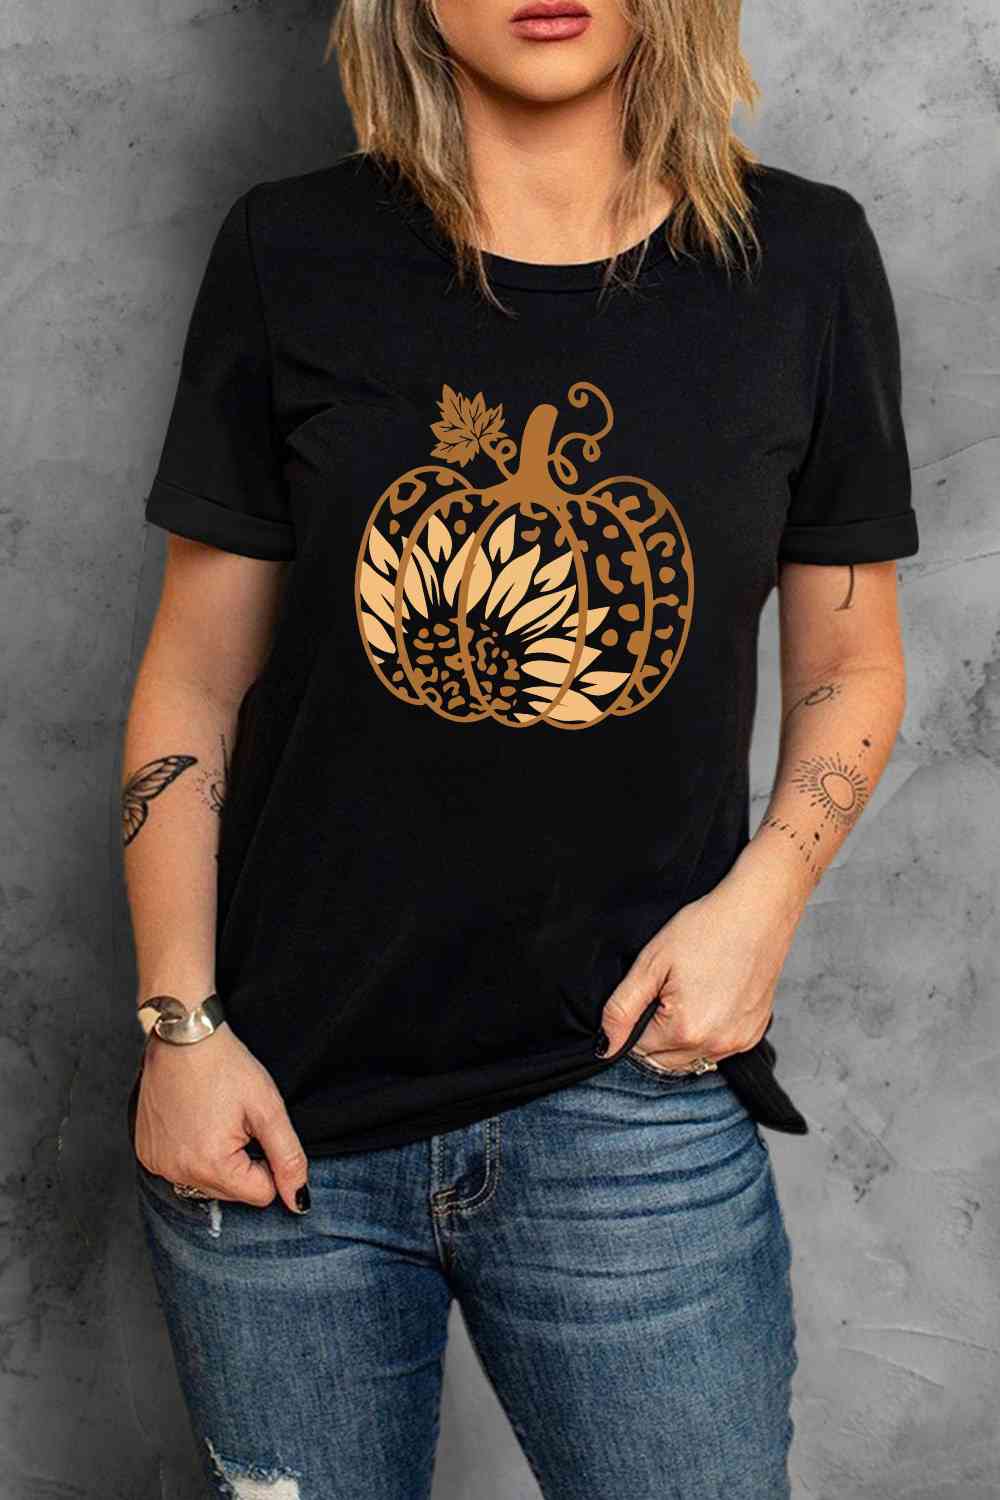 Cupid Beauty Supplies Cupid Beauty Supplies Black / S Womens Graphic Tees Pumpkin Graphic Tee: Round Neck, Short Sleeve